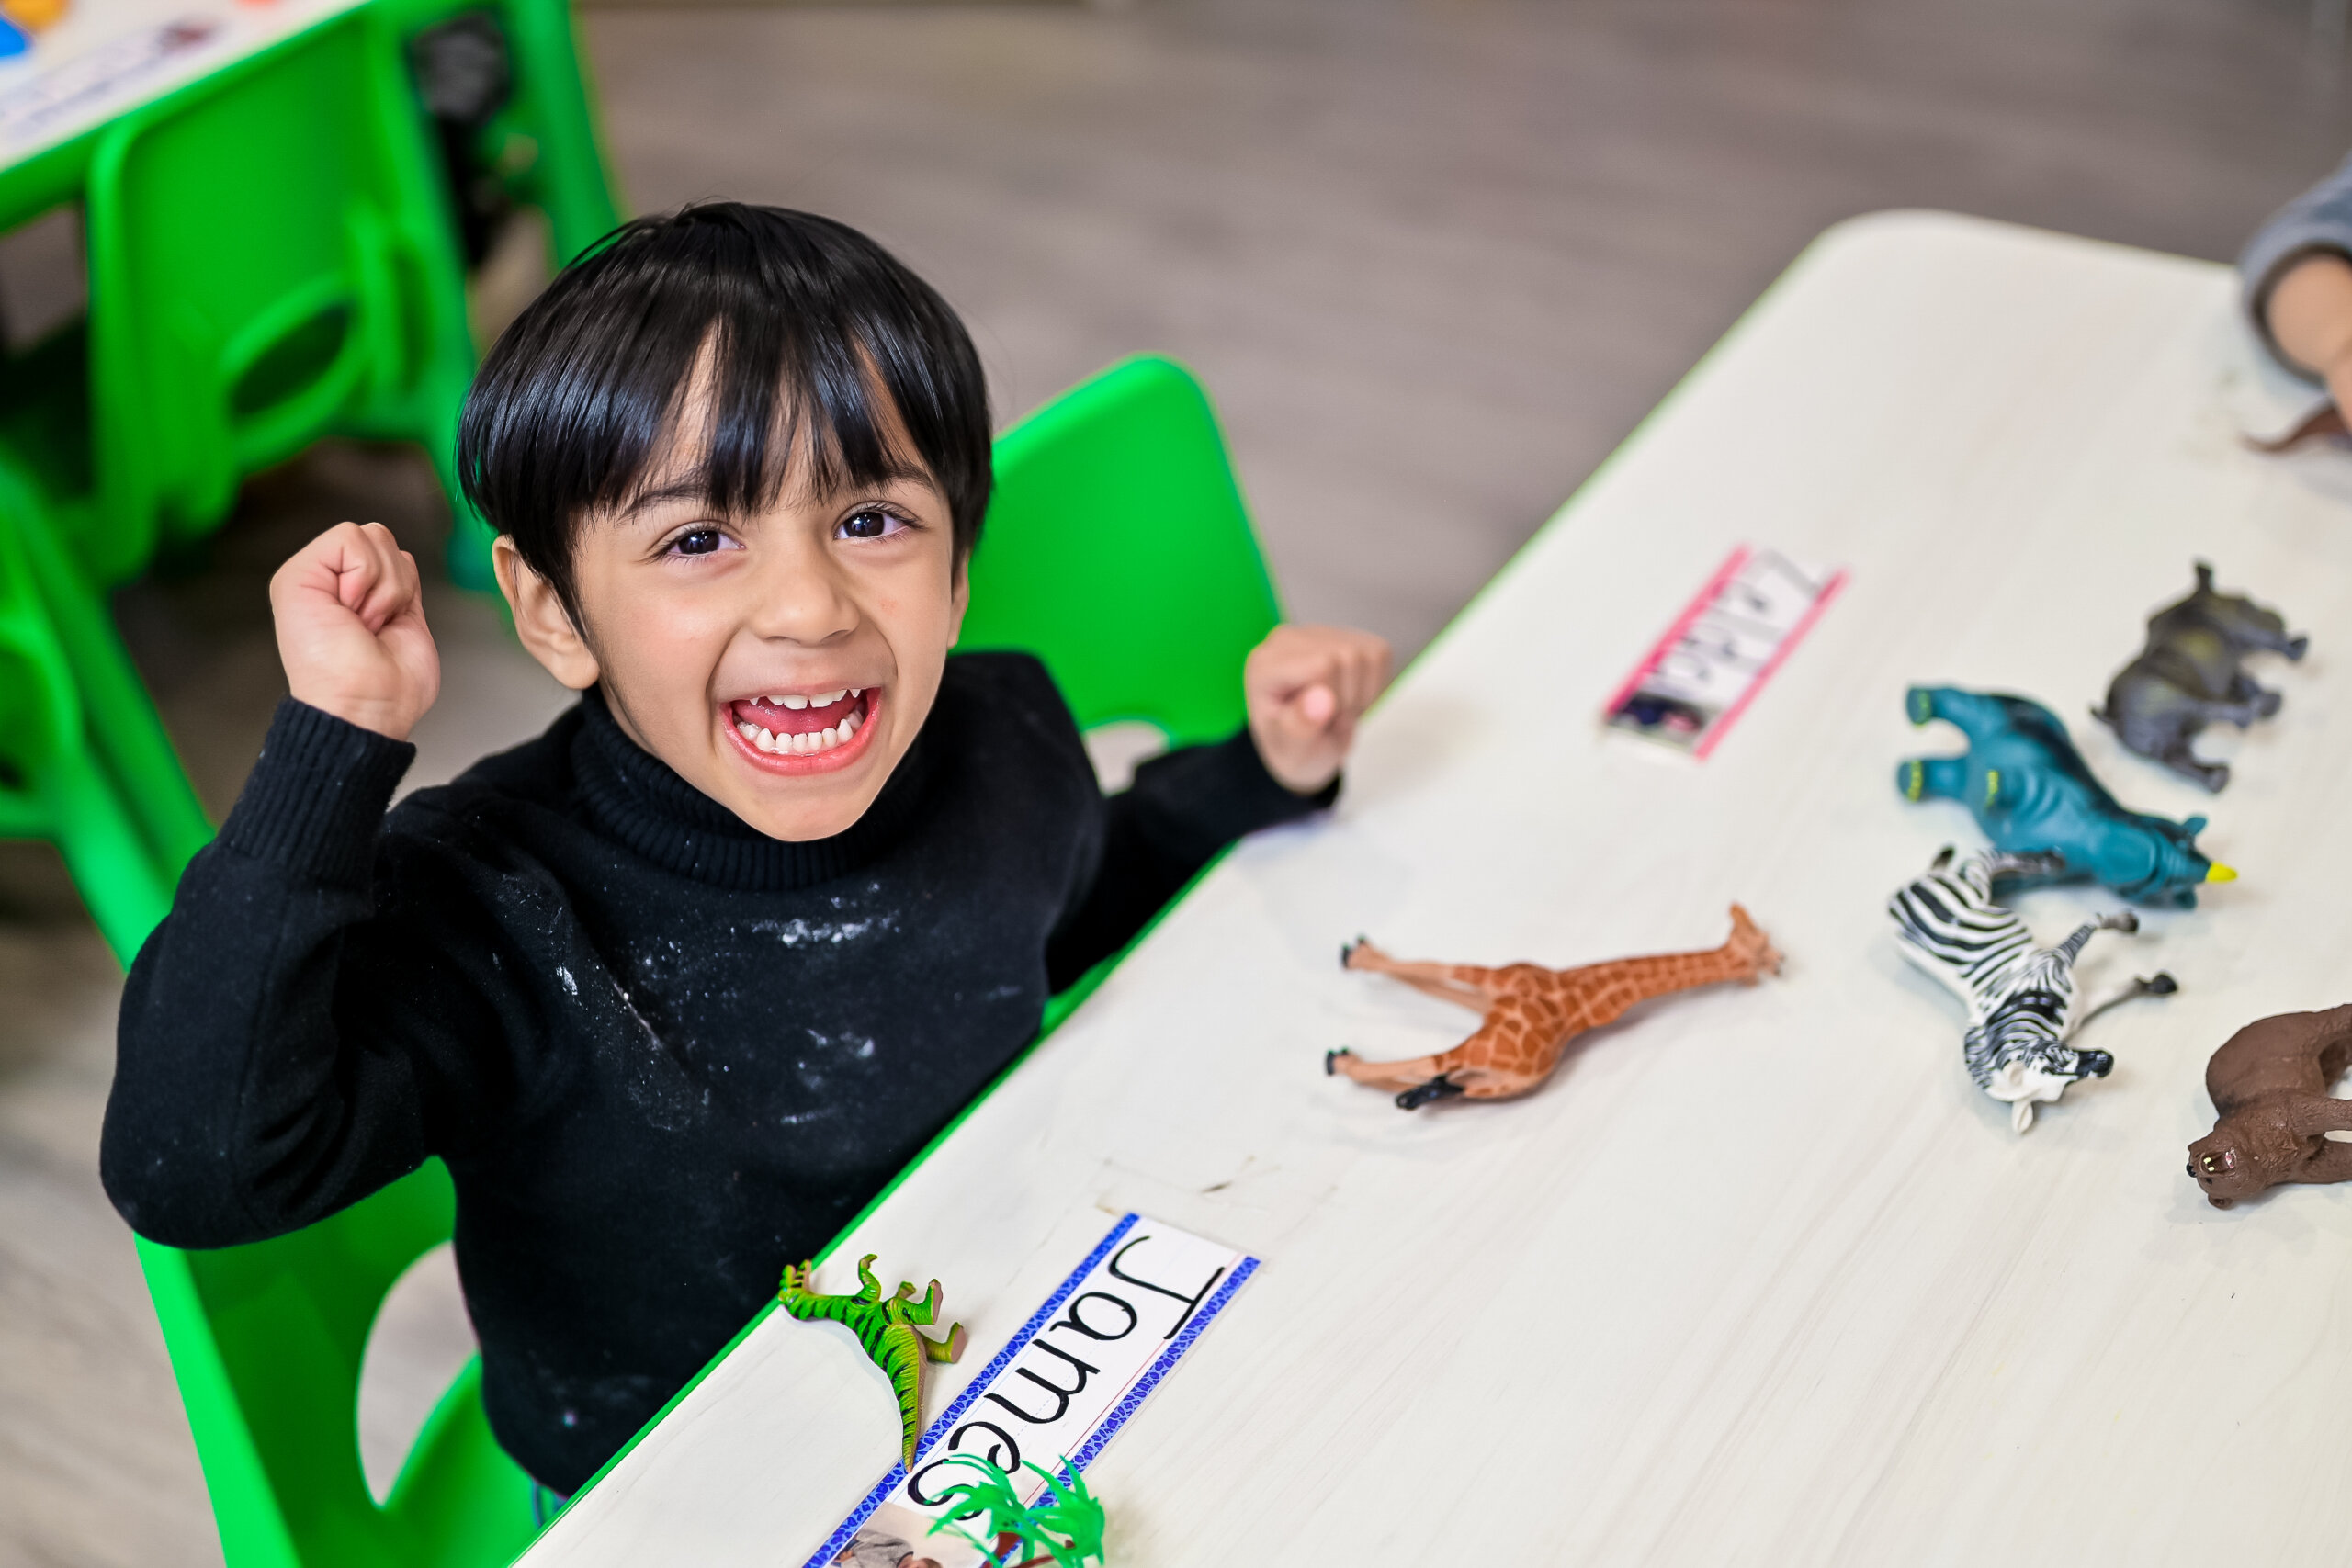 Excited young boy sitting at a table with toy animals in a daycare classroom